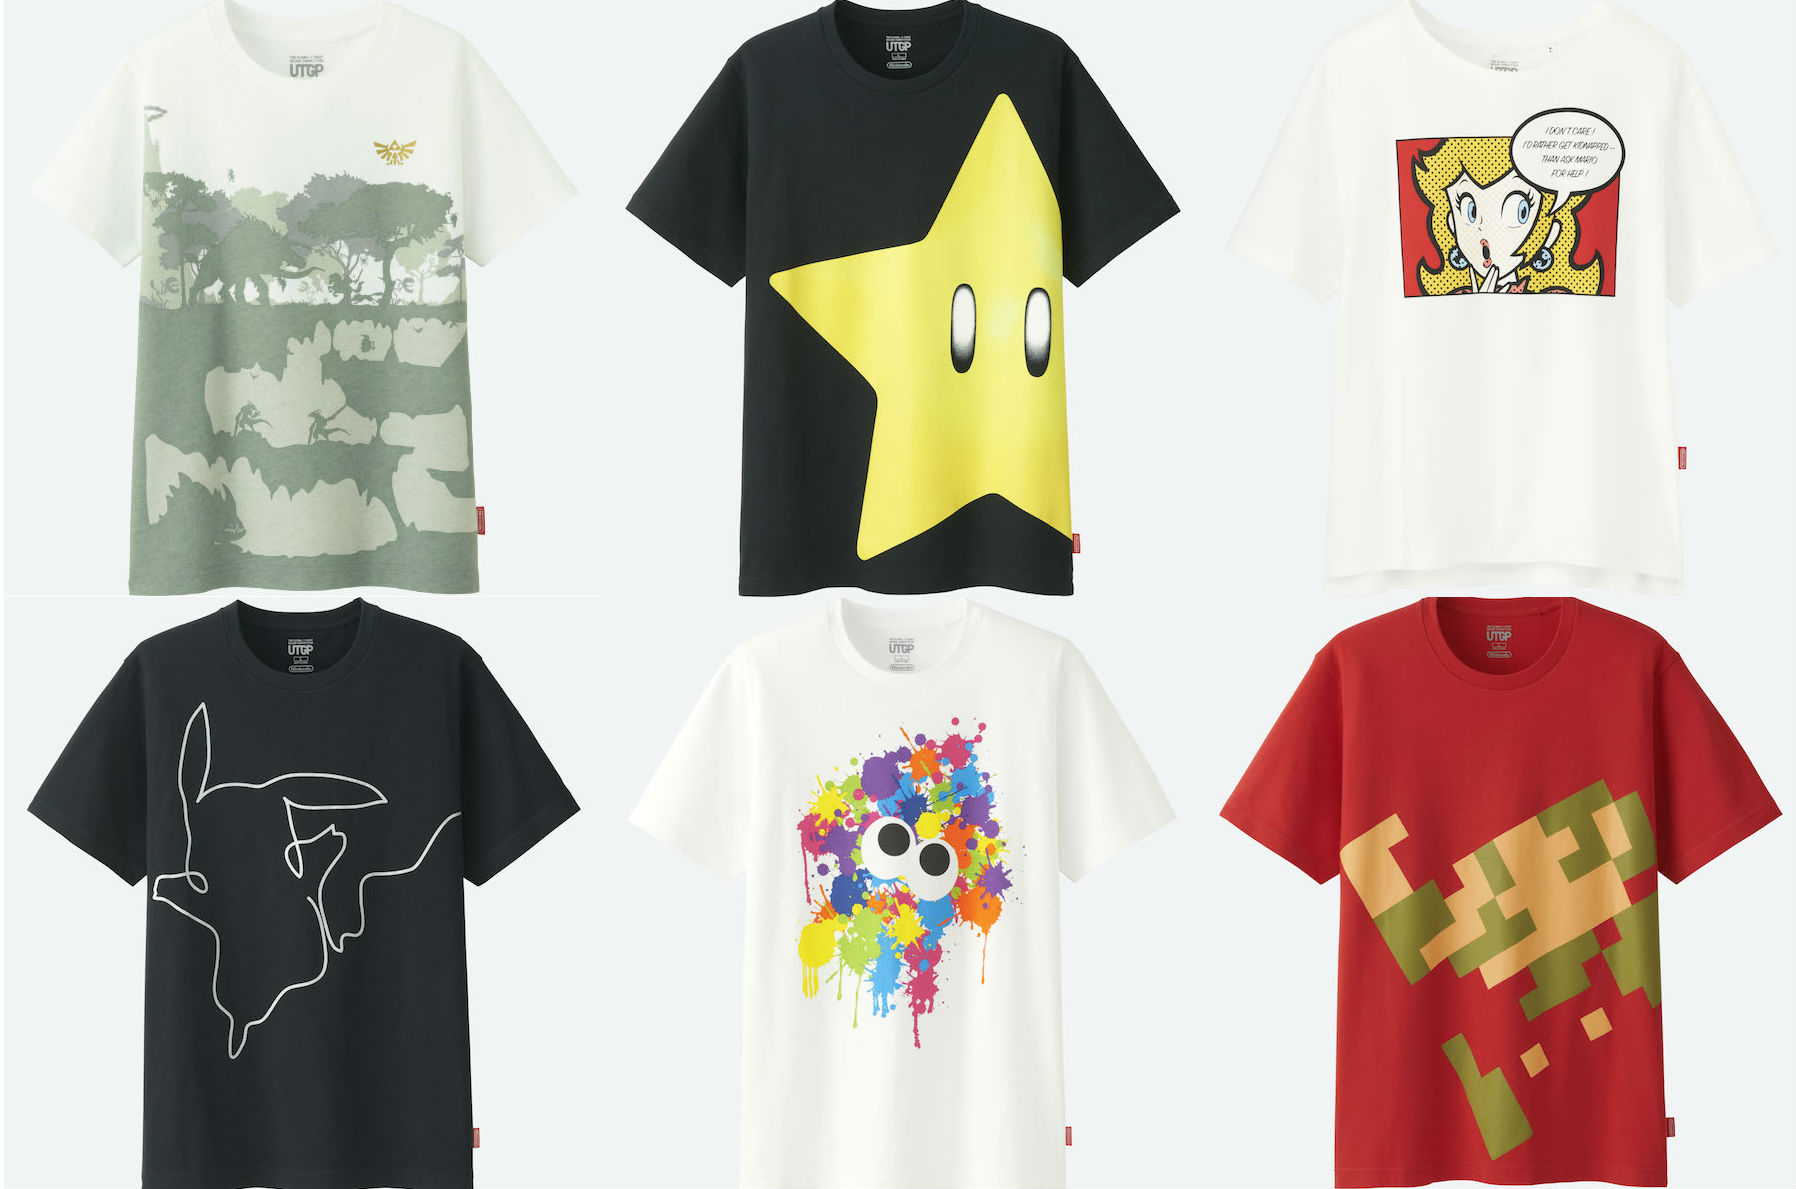 Uniqlo 2017 Nintendo T SHirt competition 2nd place